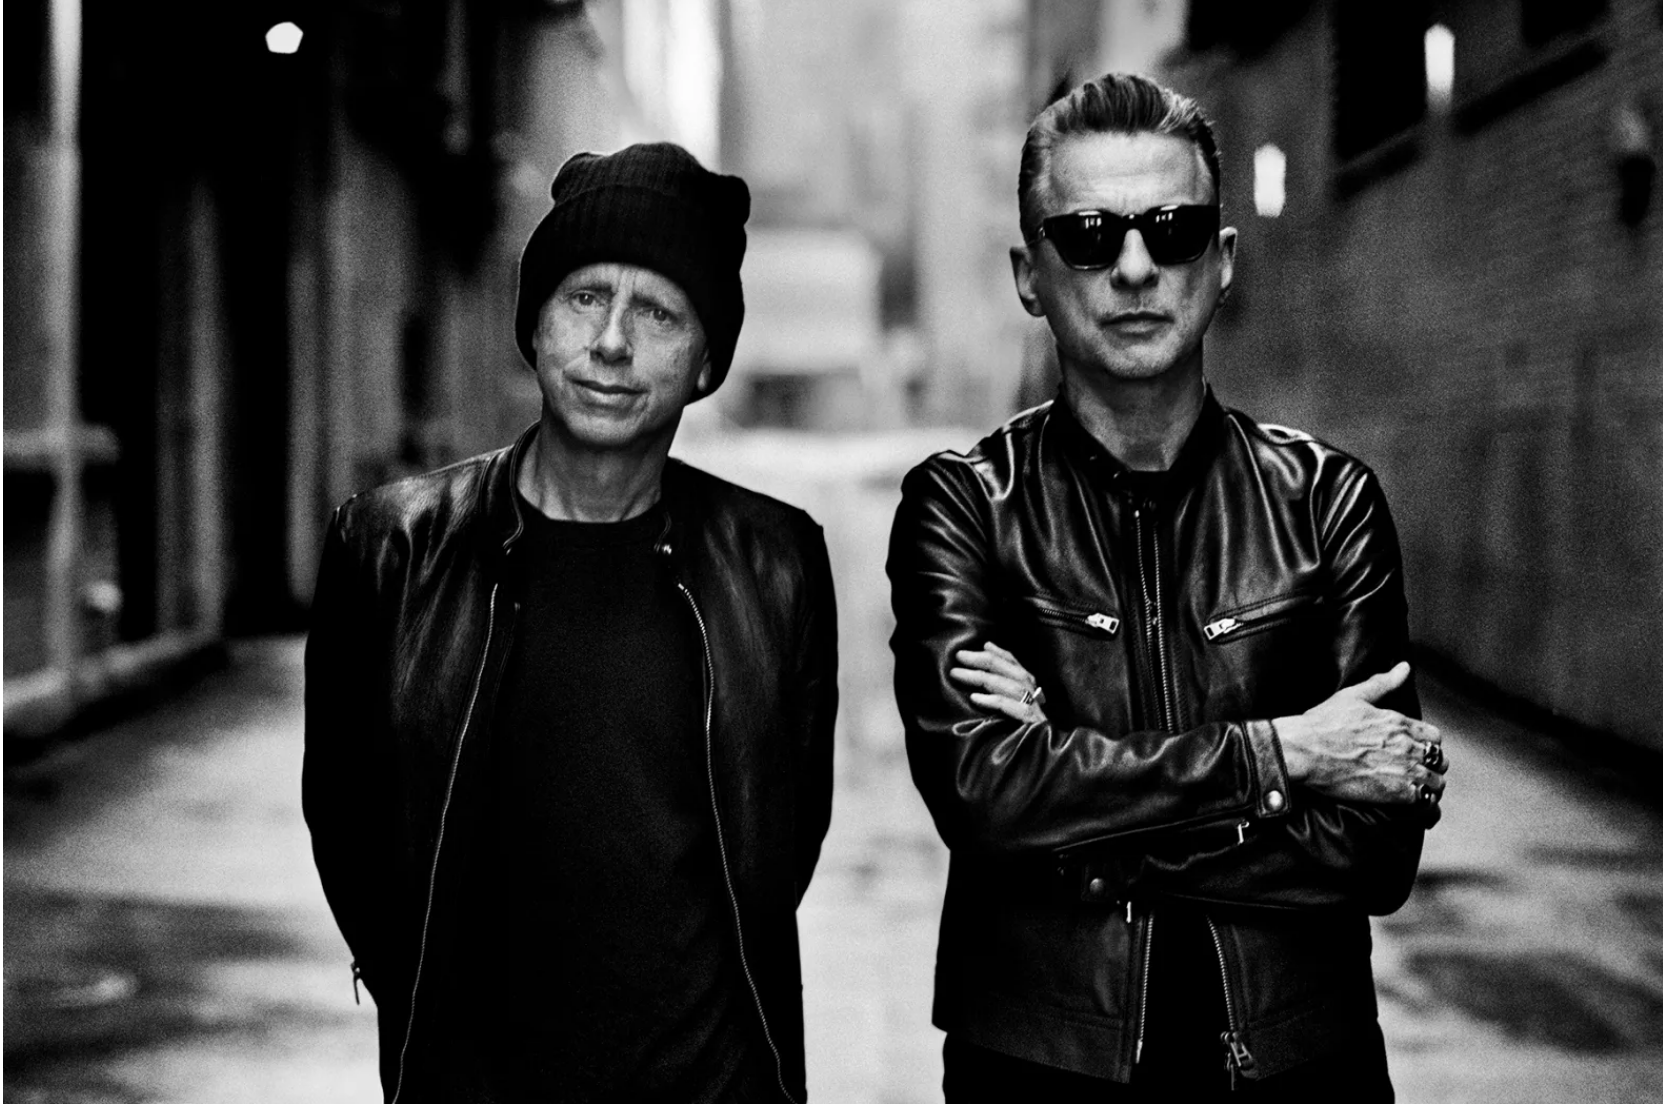 Depeche Mode's Dave Gahan Praises Music For Bringing 'People Together' During Rock and Roll Hall of Fame Speech